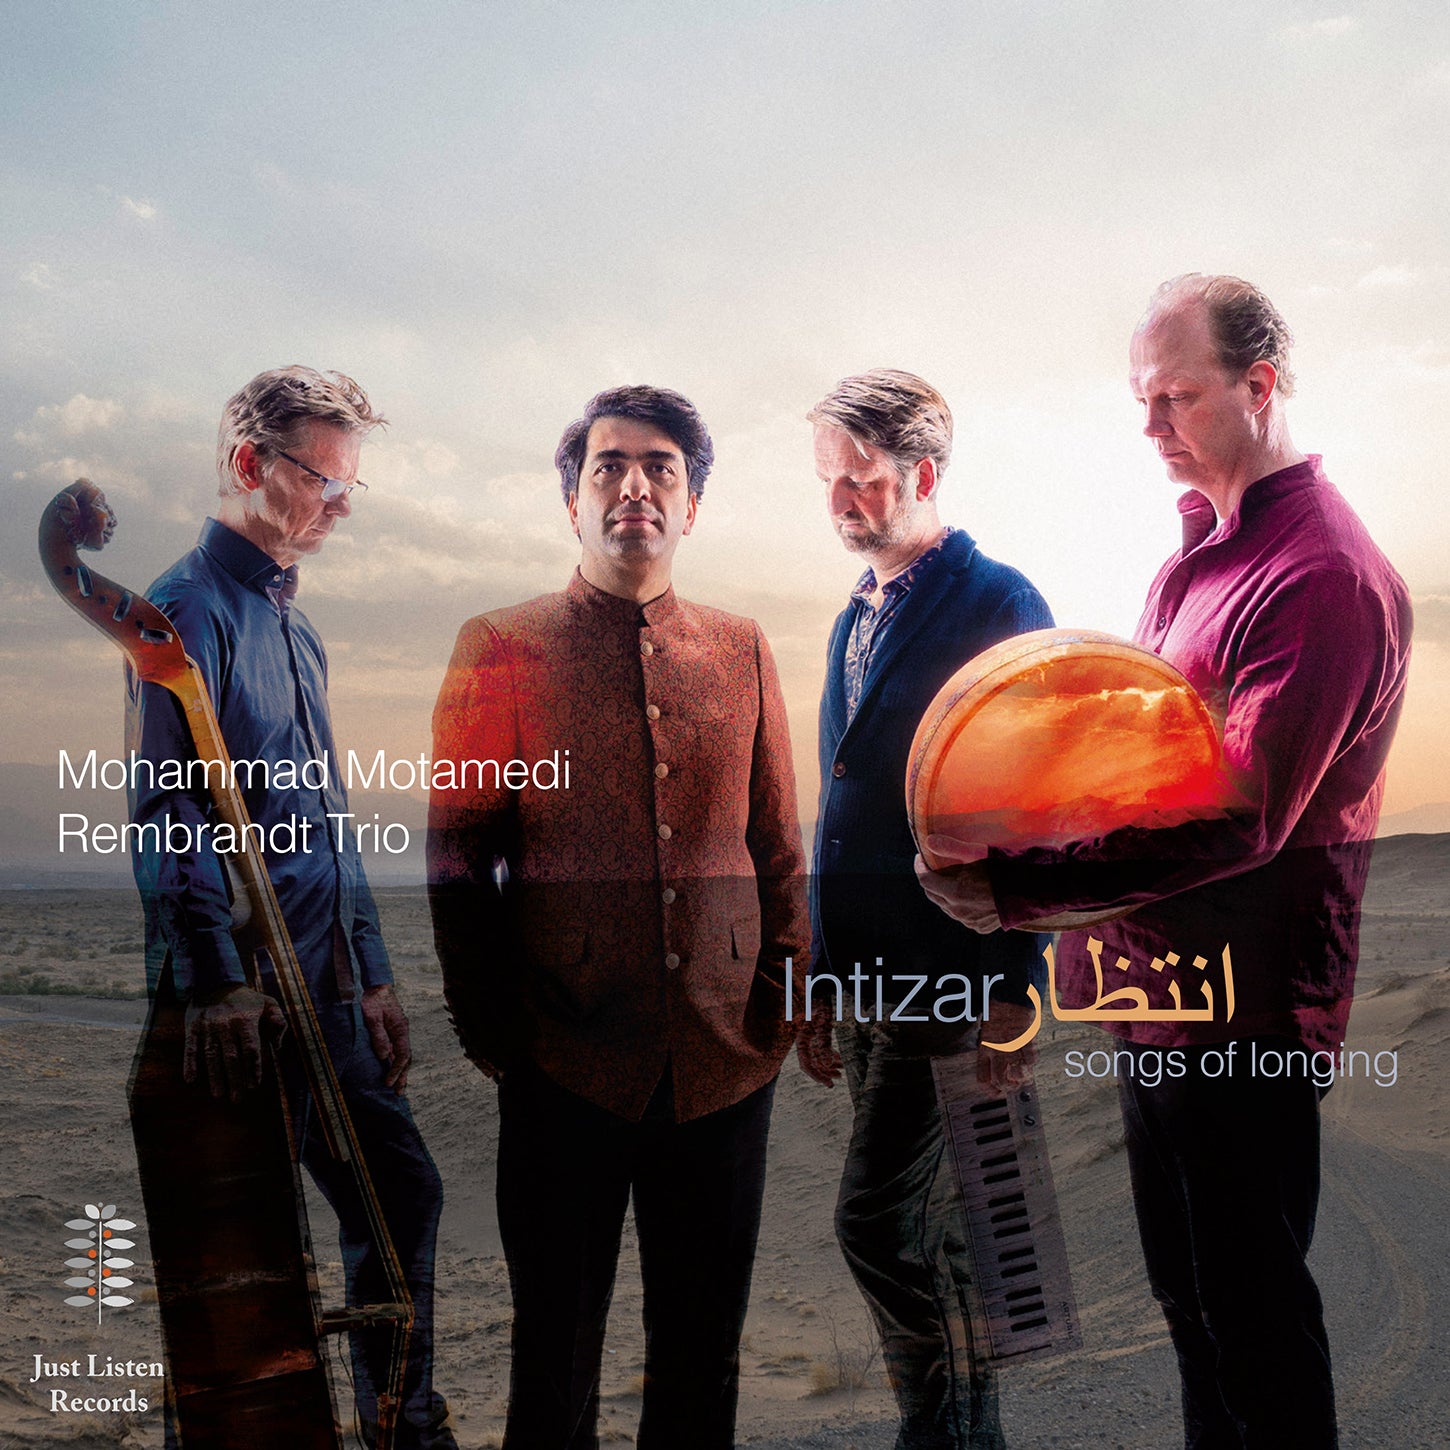 Intizar - Songs of Longing / Mohammed Motamedi & Rembrandt Trio